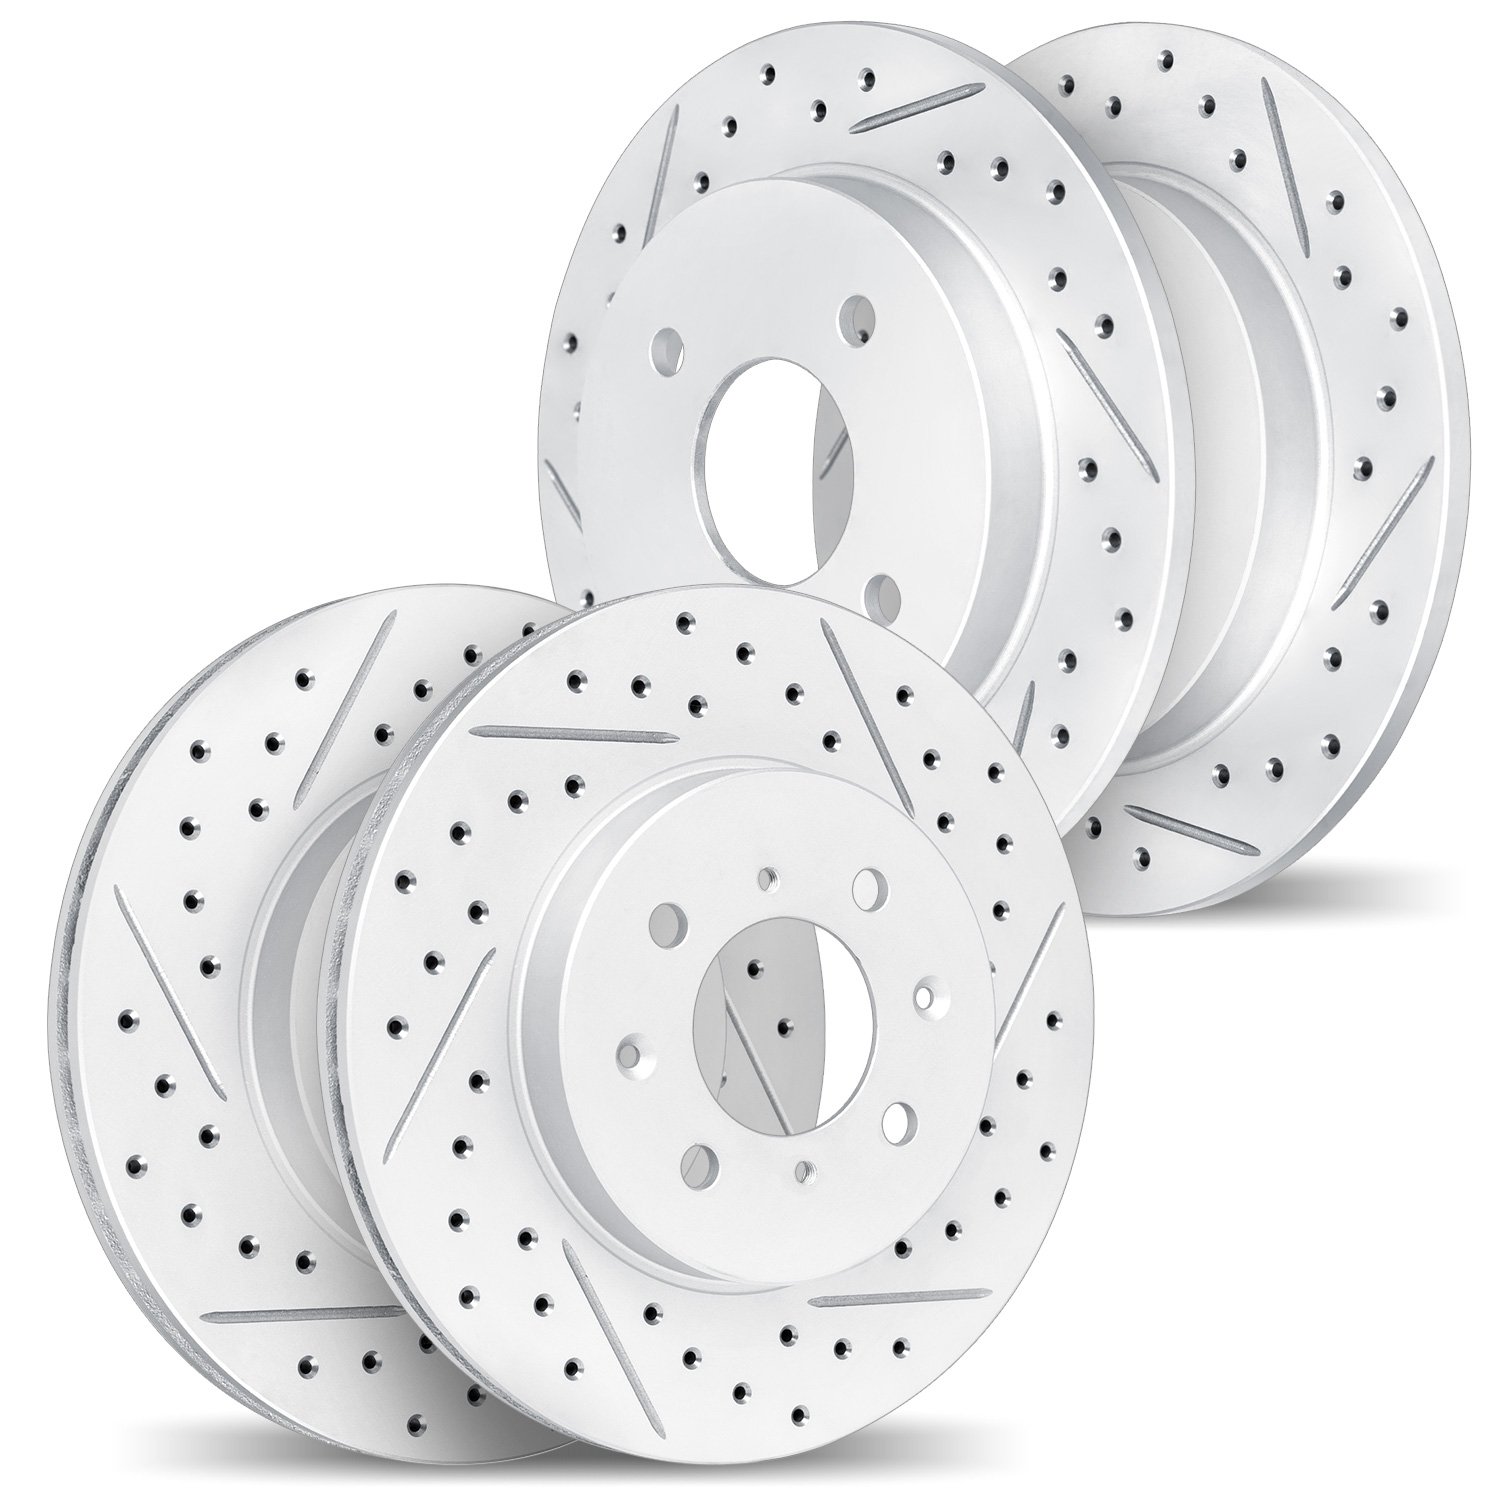 2004-03002 Geoperformance Drilled/Slotted Brake Rotors, 2012-2017 Multiple Makes/Models, Position: Front and Rear